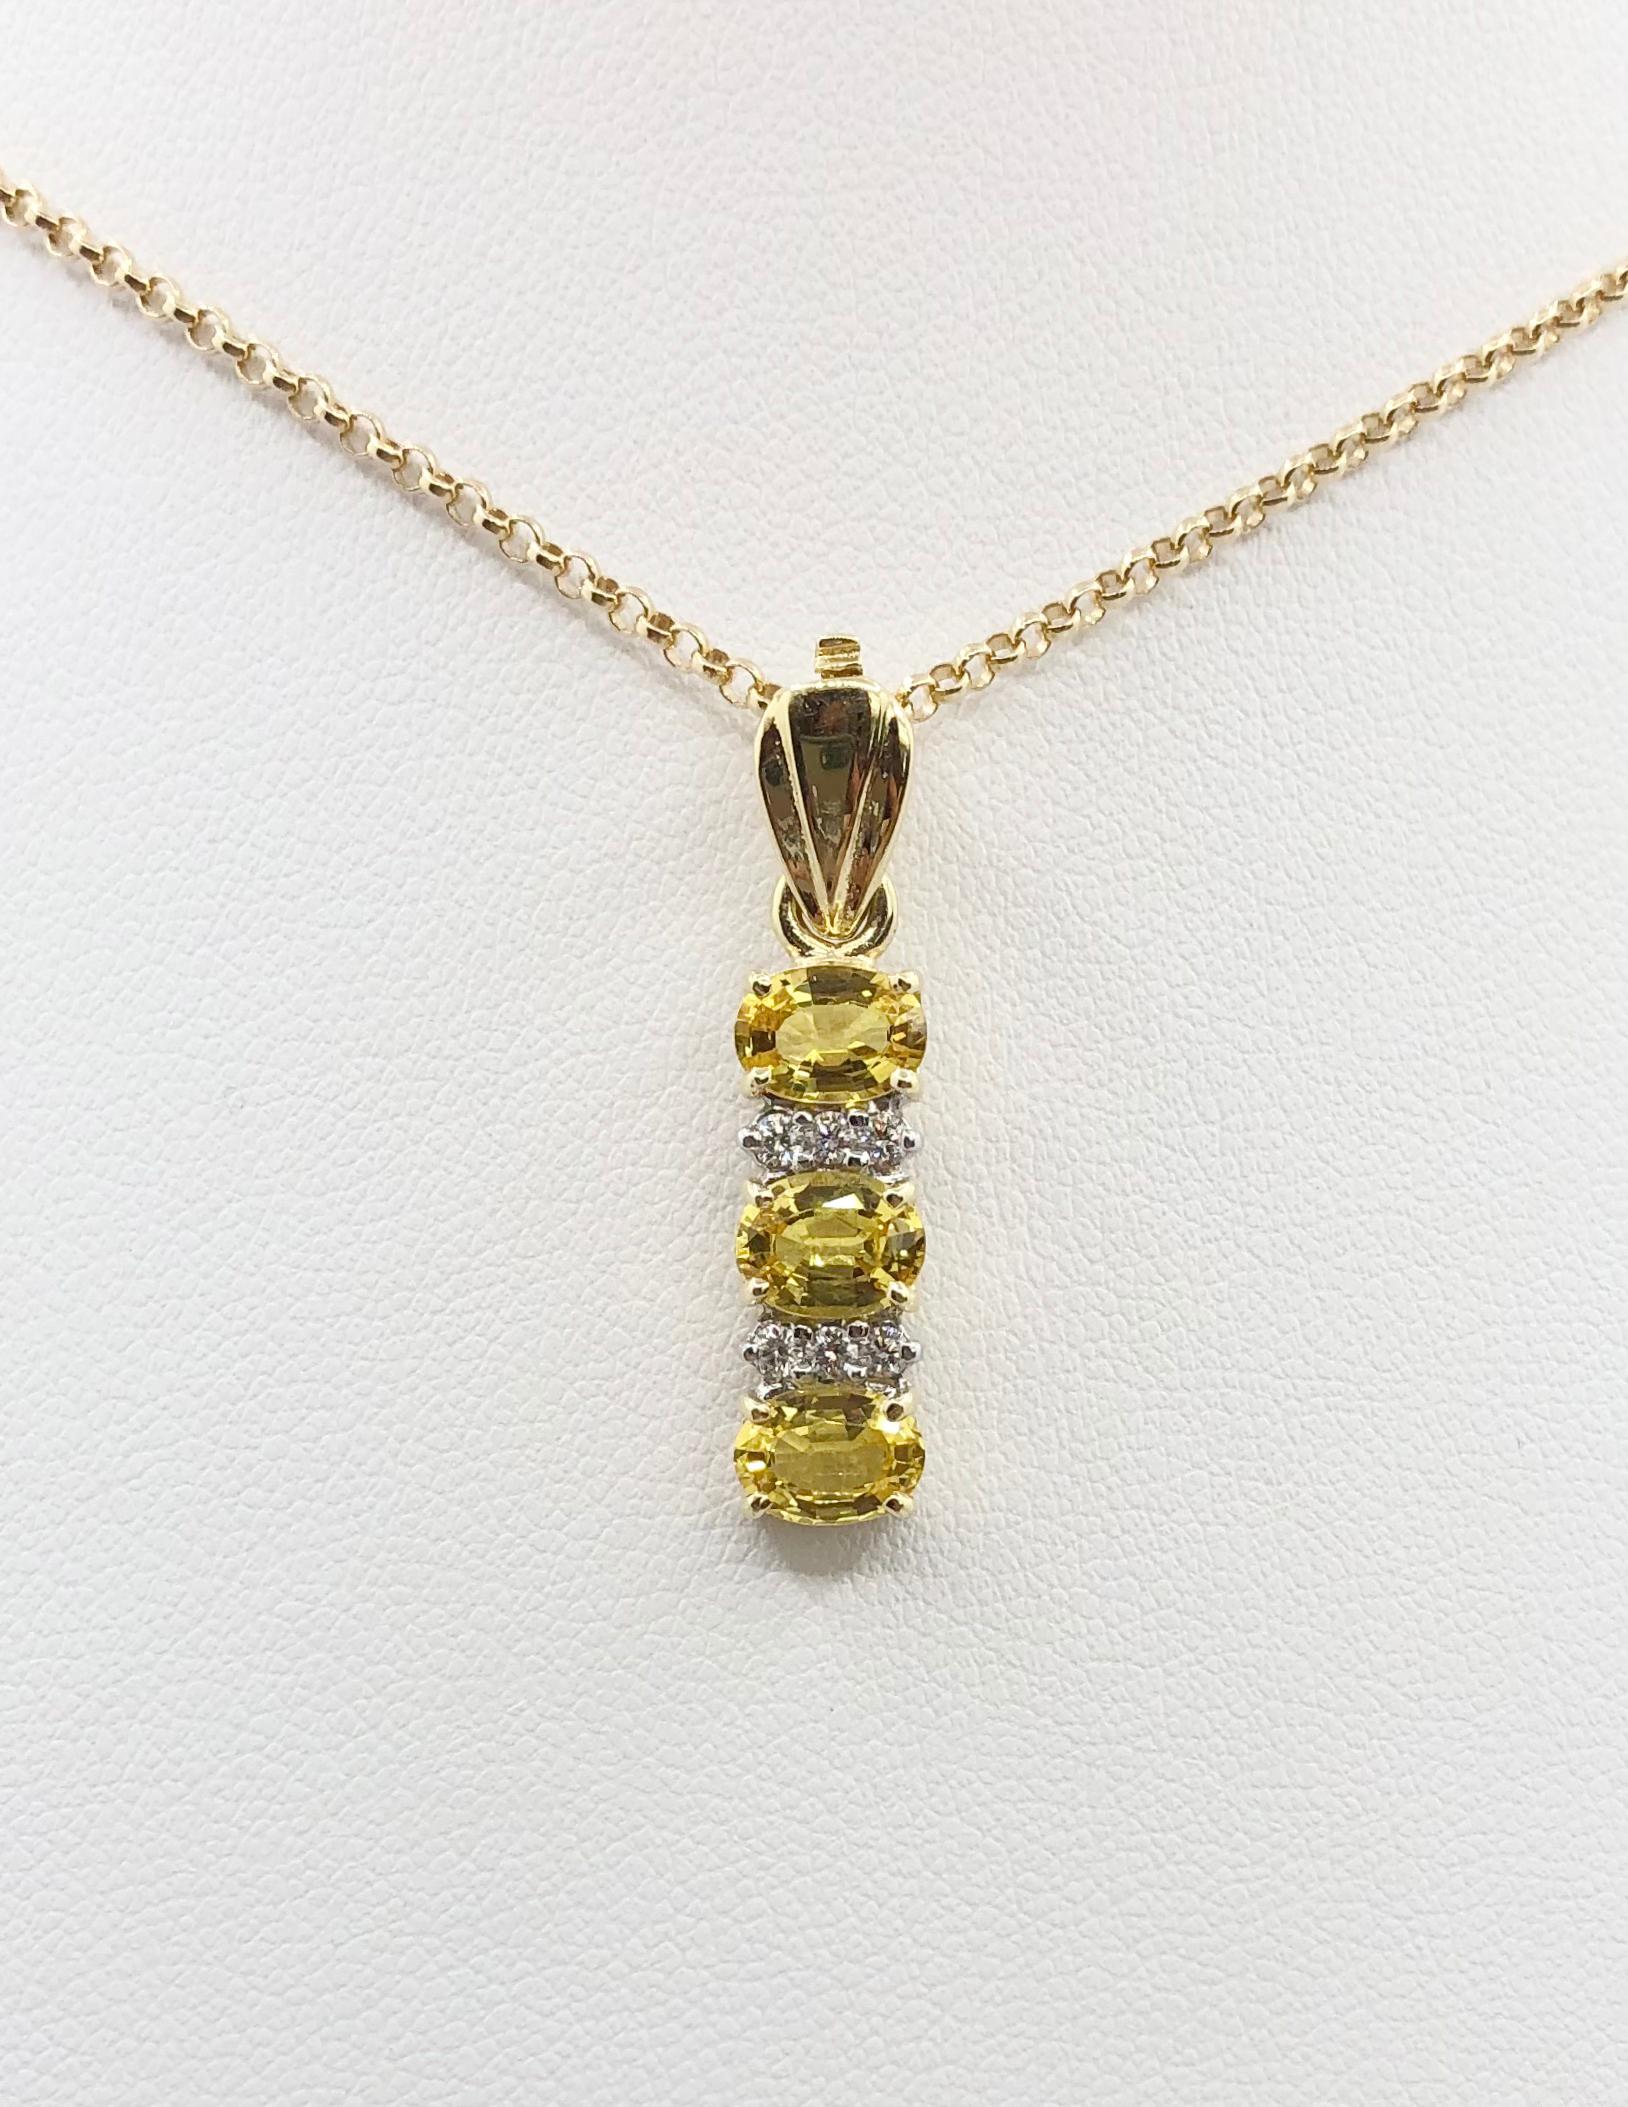 Yellow Sapphire 2.45 carats with Diamond 0.14 carat Pendant set in 18 Karat Gold Settings
(chain not included)

Width: 0.7 cm 
Length: 3.0 cm
Total Weight: 4.29 grams

